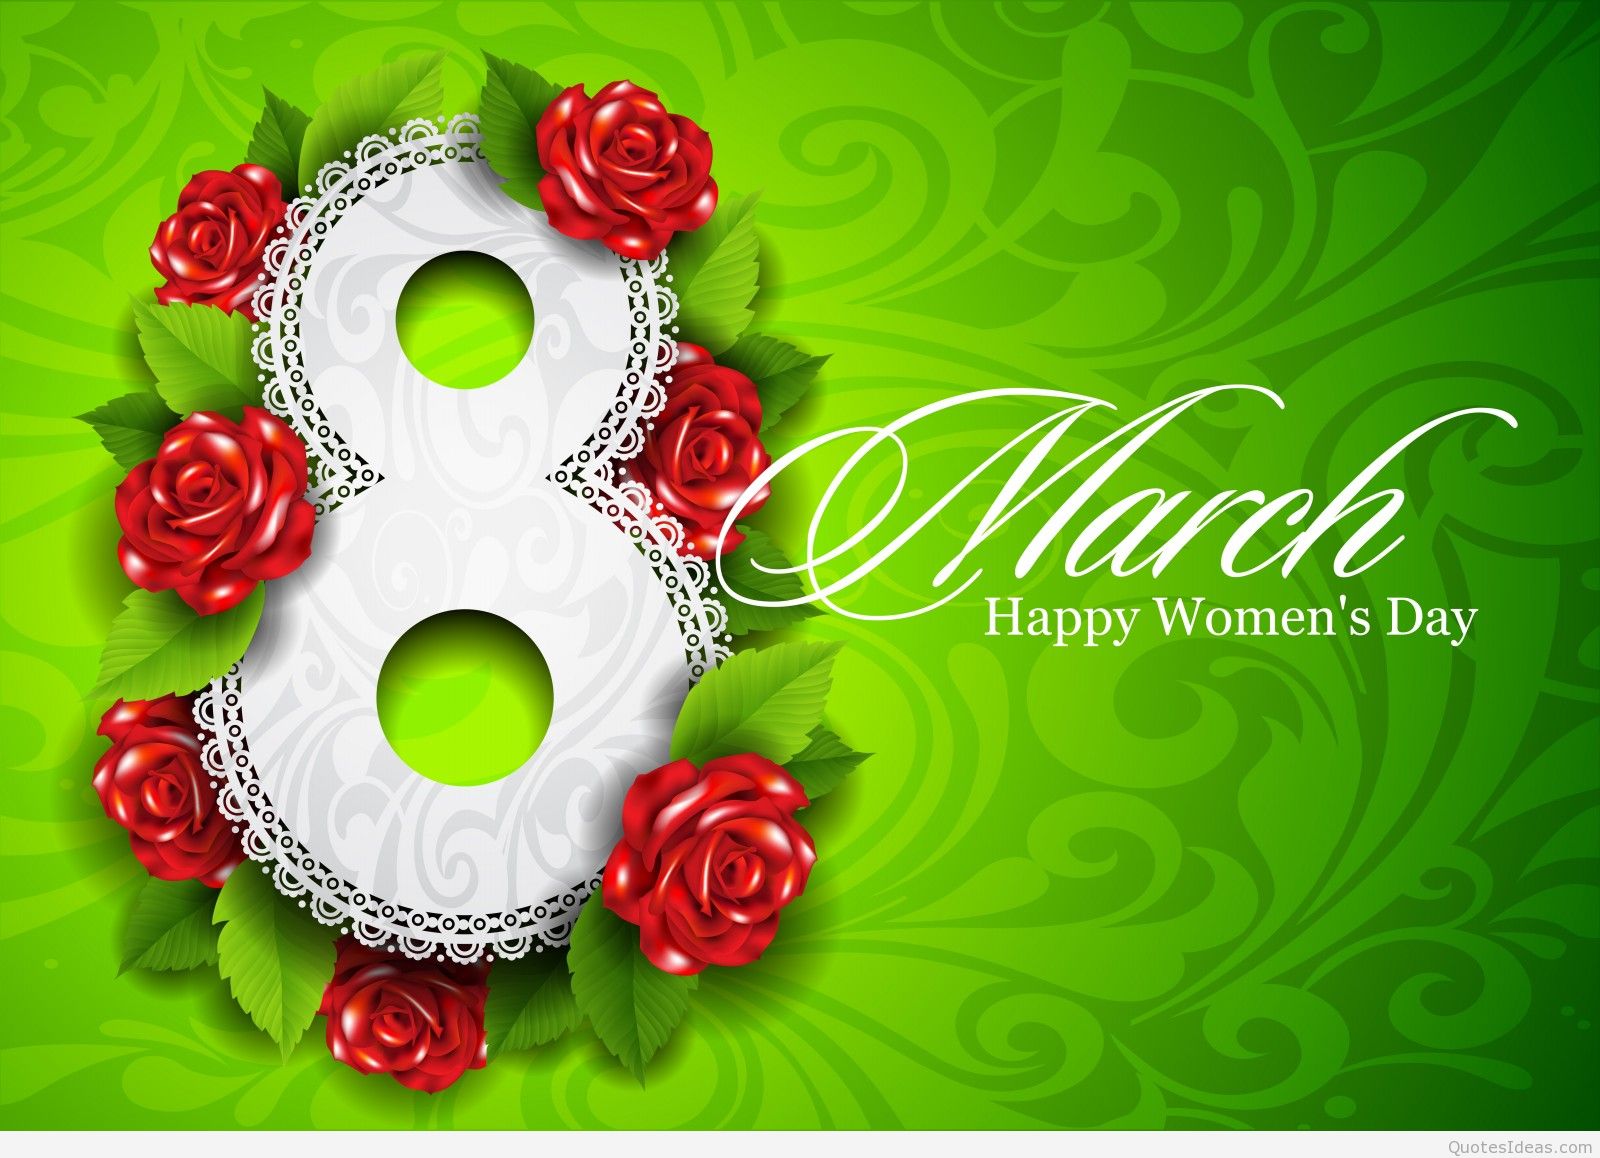 women's day wallpaper,green,red,font,greeting card,flower